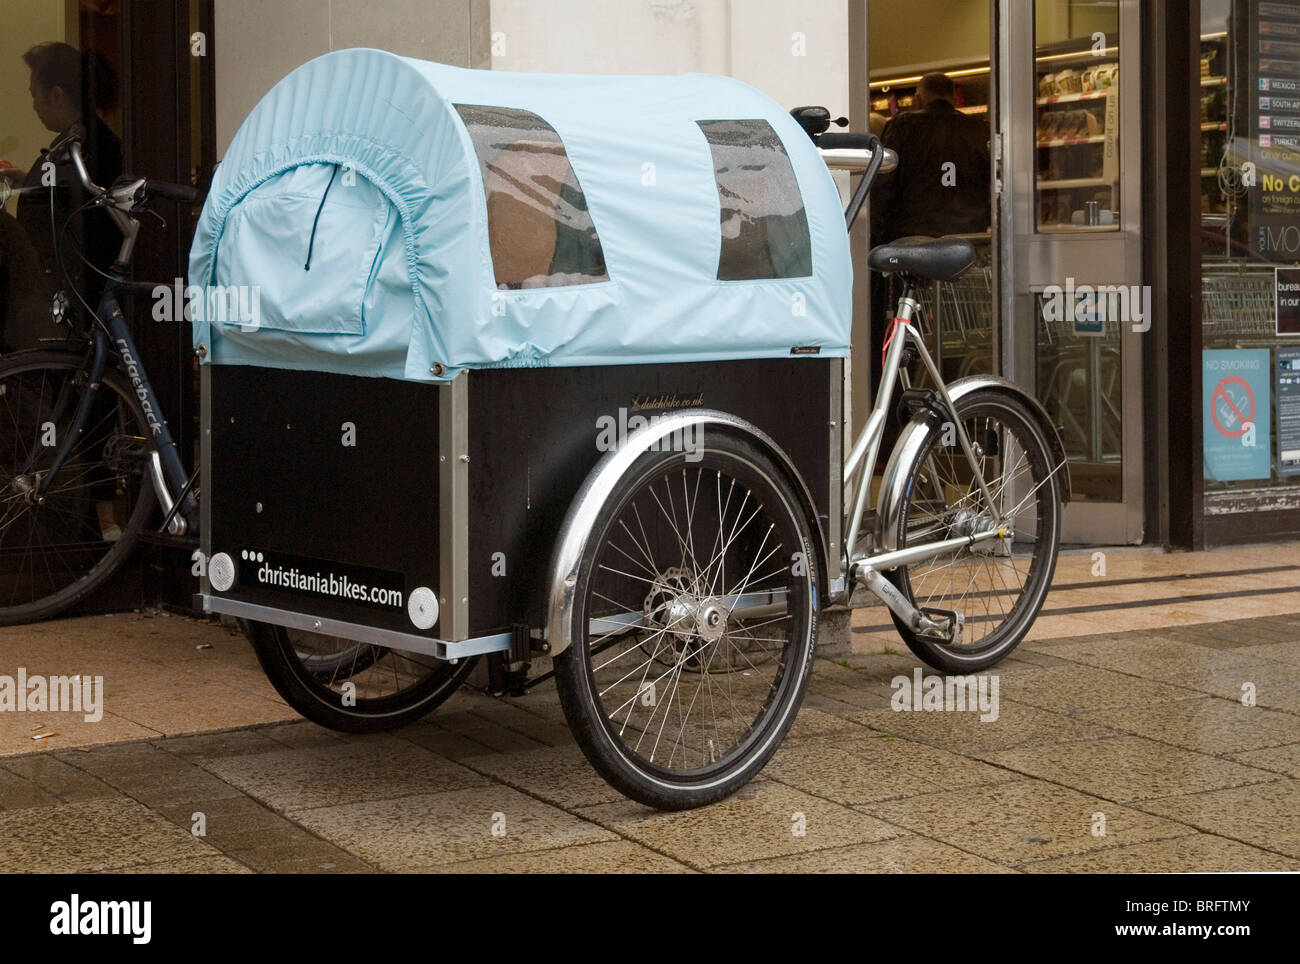 A cargo bike from the Danish firm Christiania, fitted out to transport  children, parked outside a Cambridge city centre store Stock Photo - Alamy